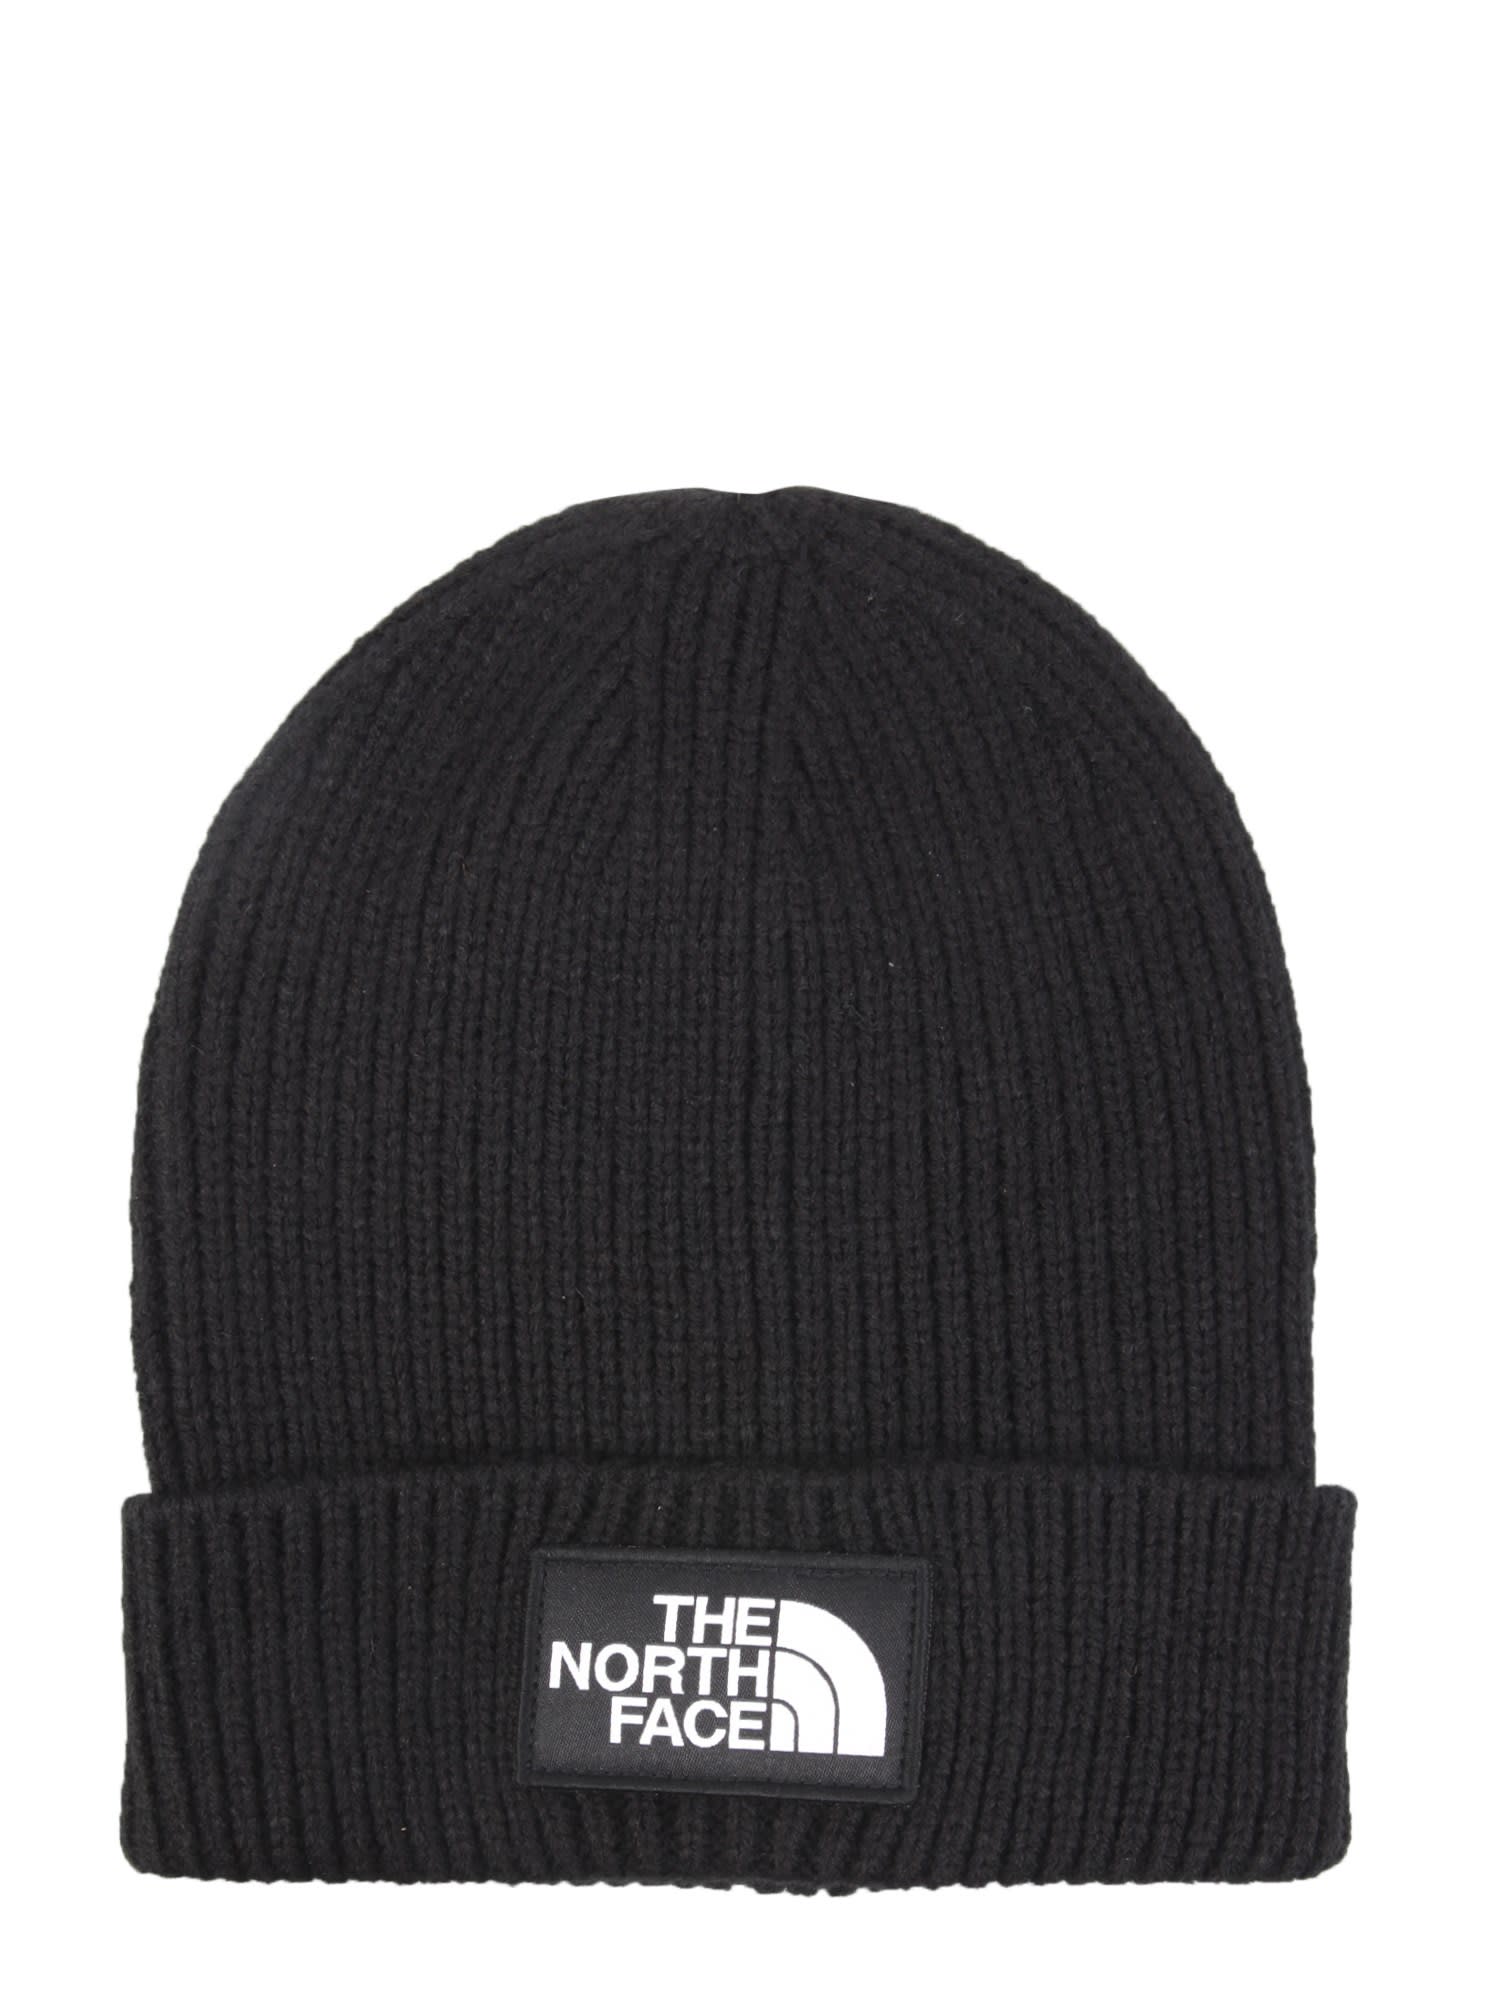 THE NORTH FACE KNITTED HAT,NF0A3FJX JK31